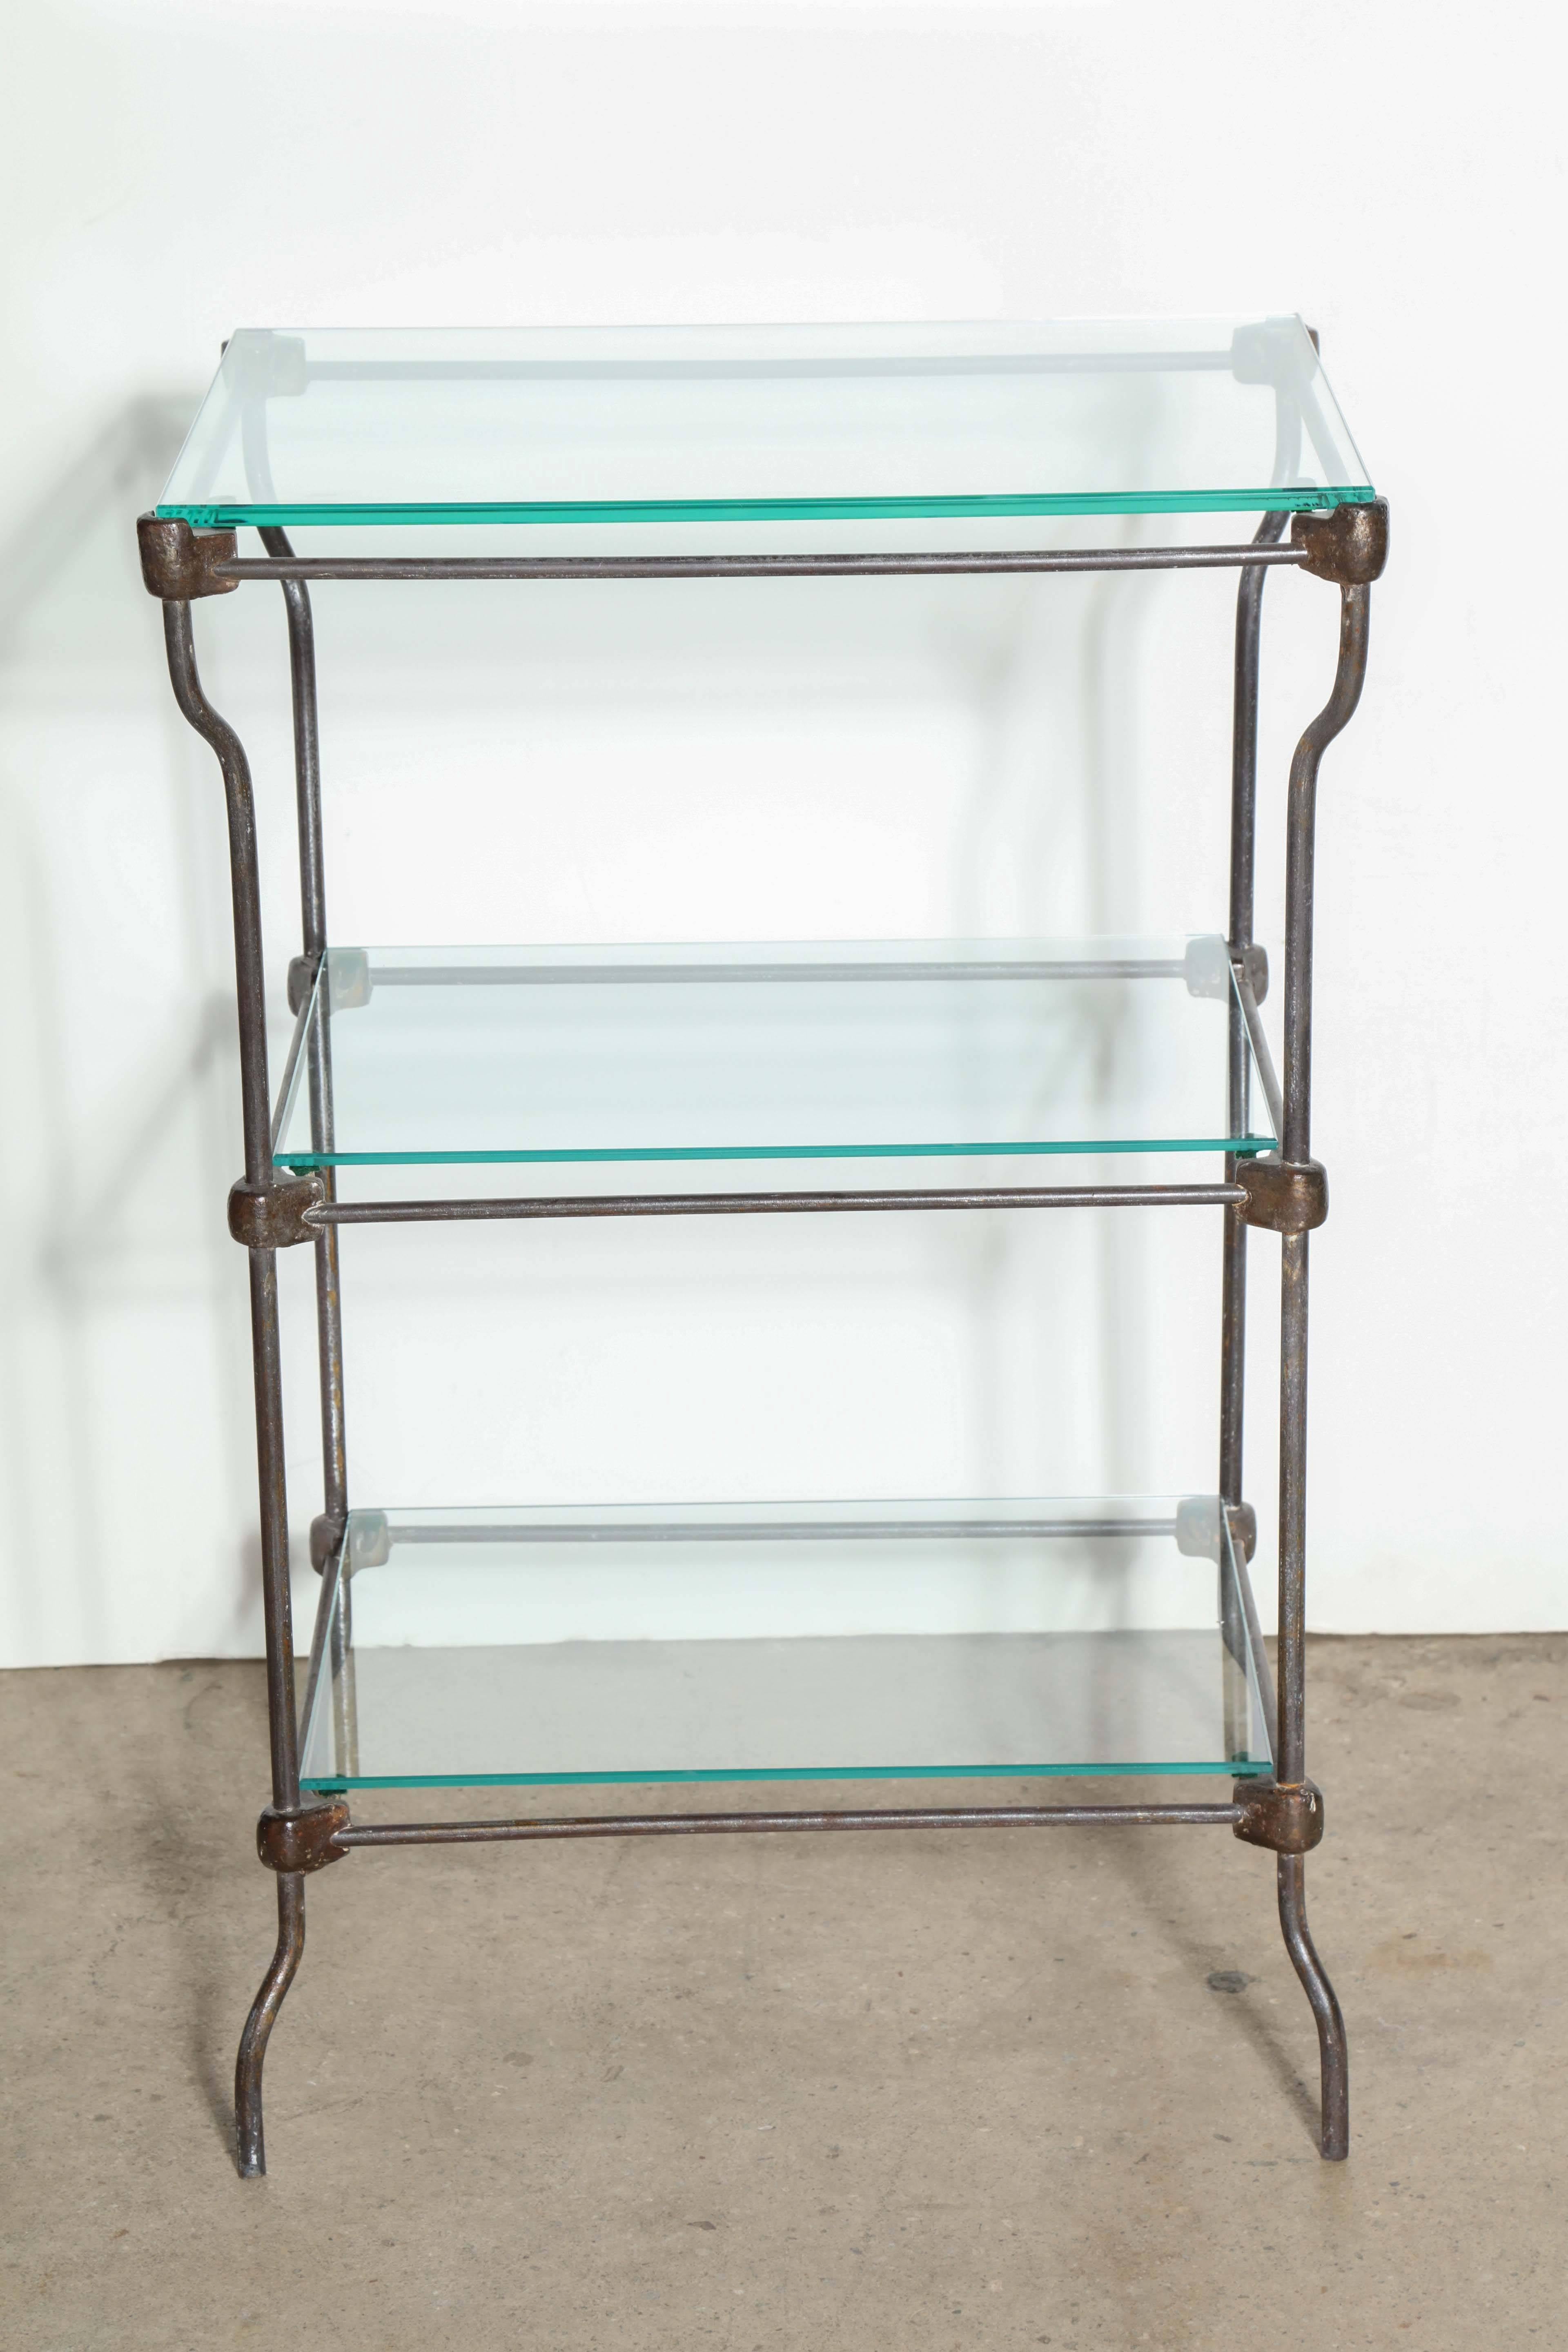 Circa 1890's Curved Iron and Glass Three Tier Etagere, Beverage Server, Serving Table, Dry Bar.  Featuring a detailed sturdy Steel framework, three levels with larger top shelf. Three new glass shelves. Cabriole legs. Industrial. Elegant. Versatile.